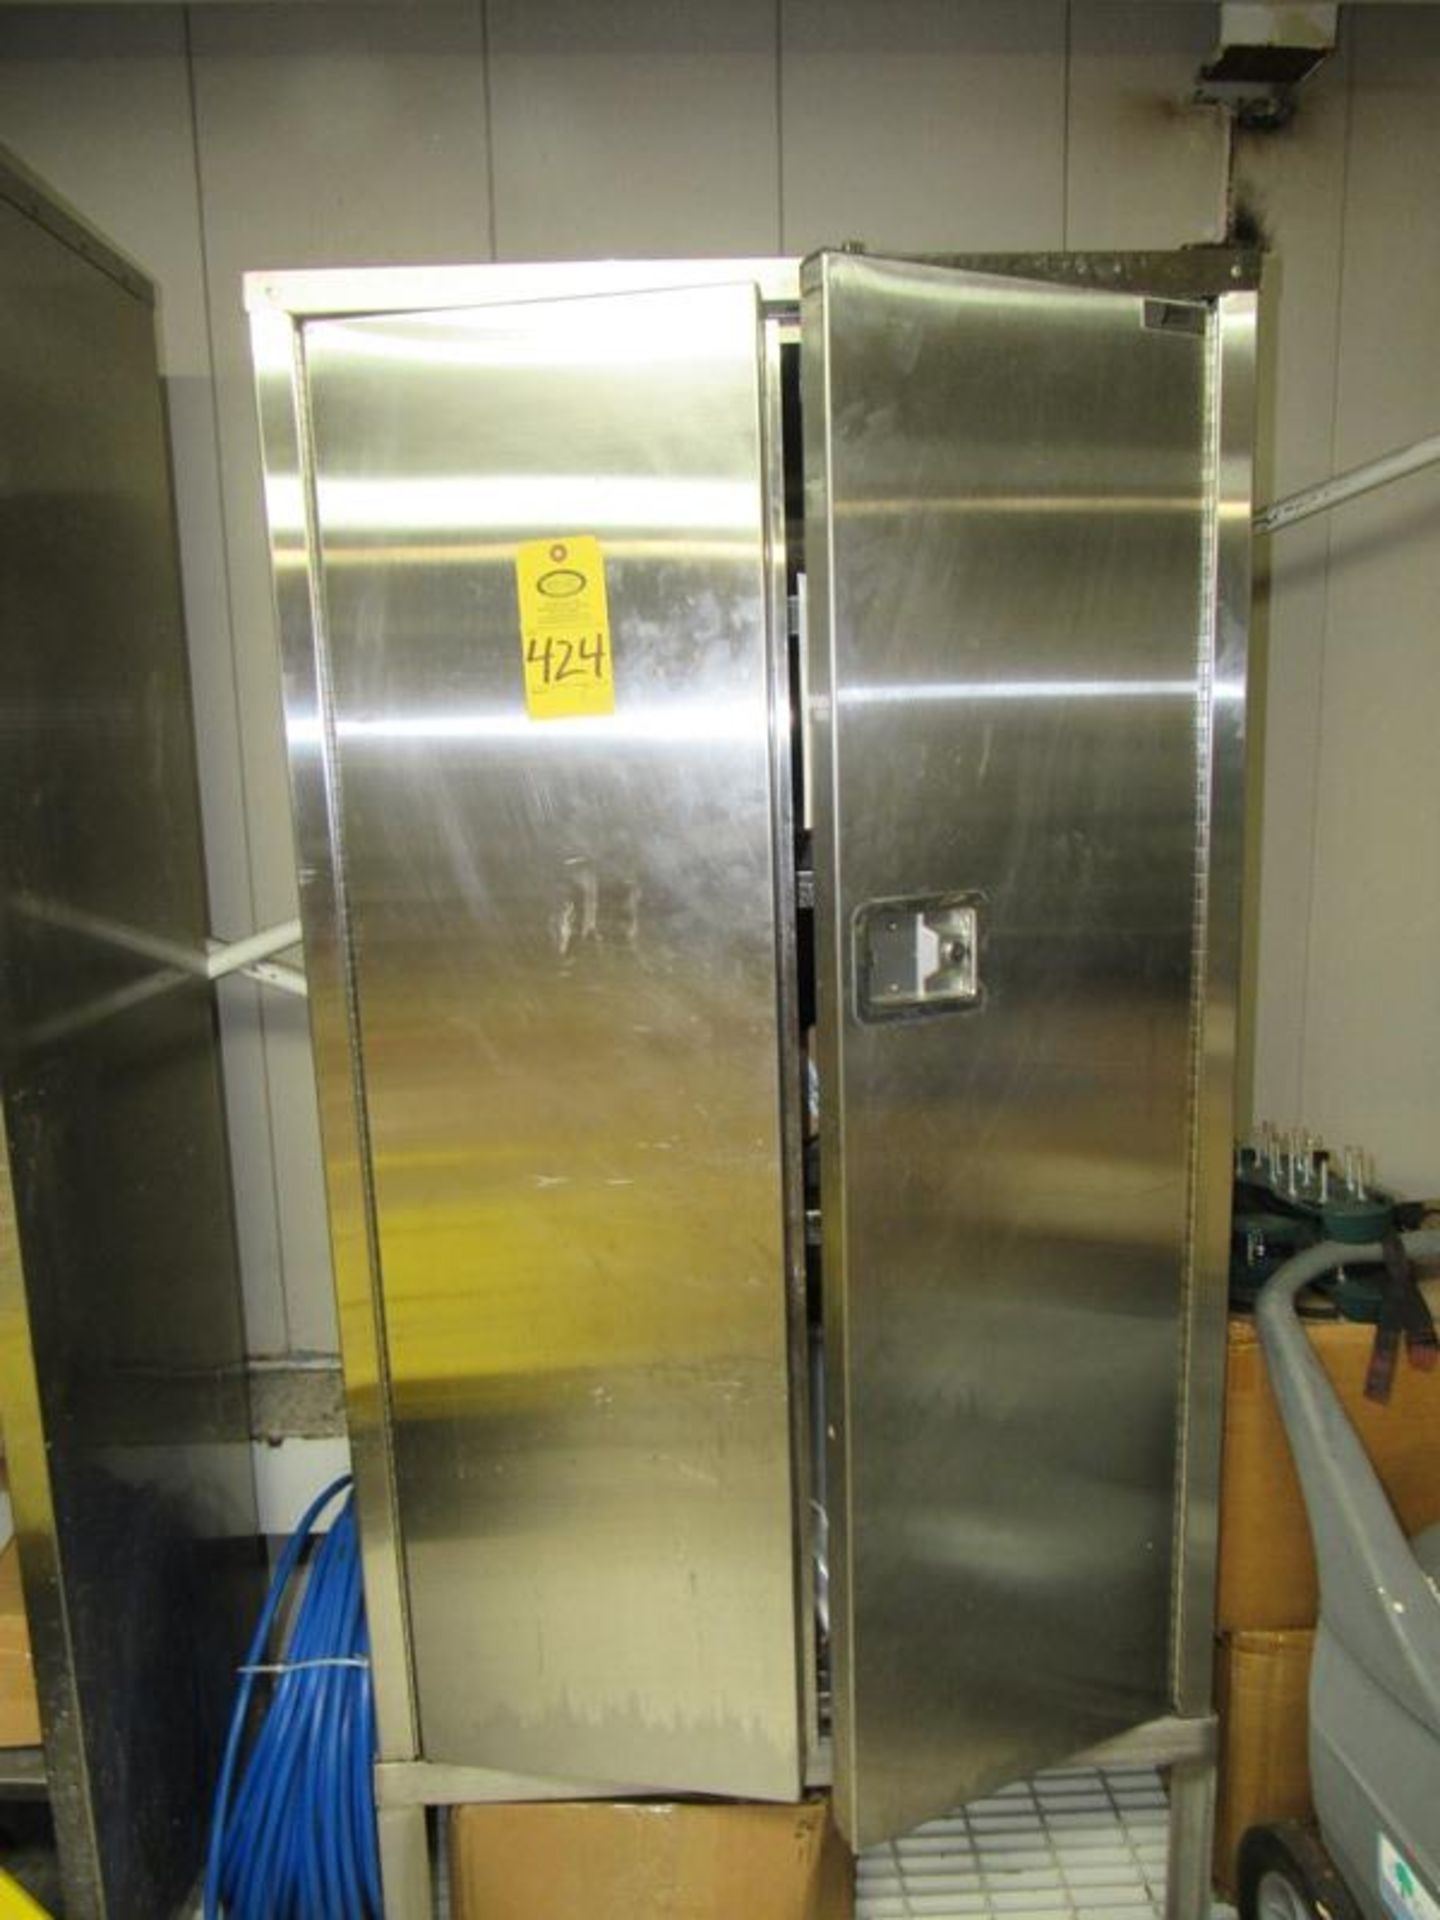 Jamco Stainless Steel Cabinet, 36" W X 18" D X 5' T on stand and contents, broken latch (Required